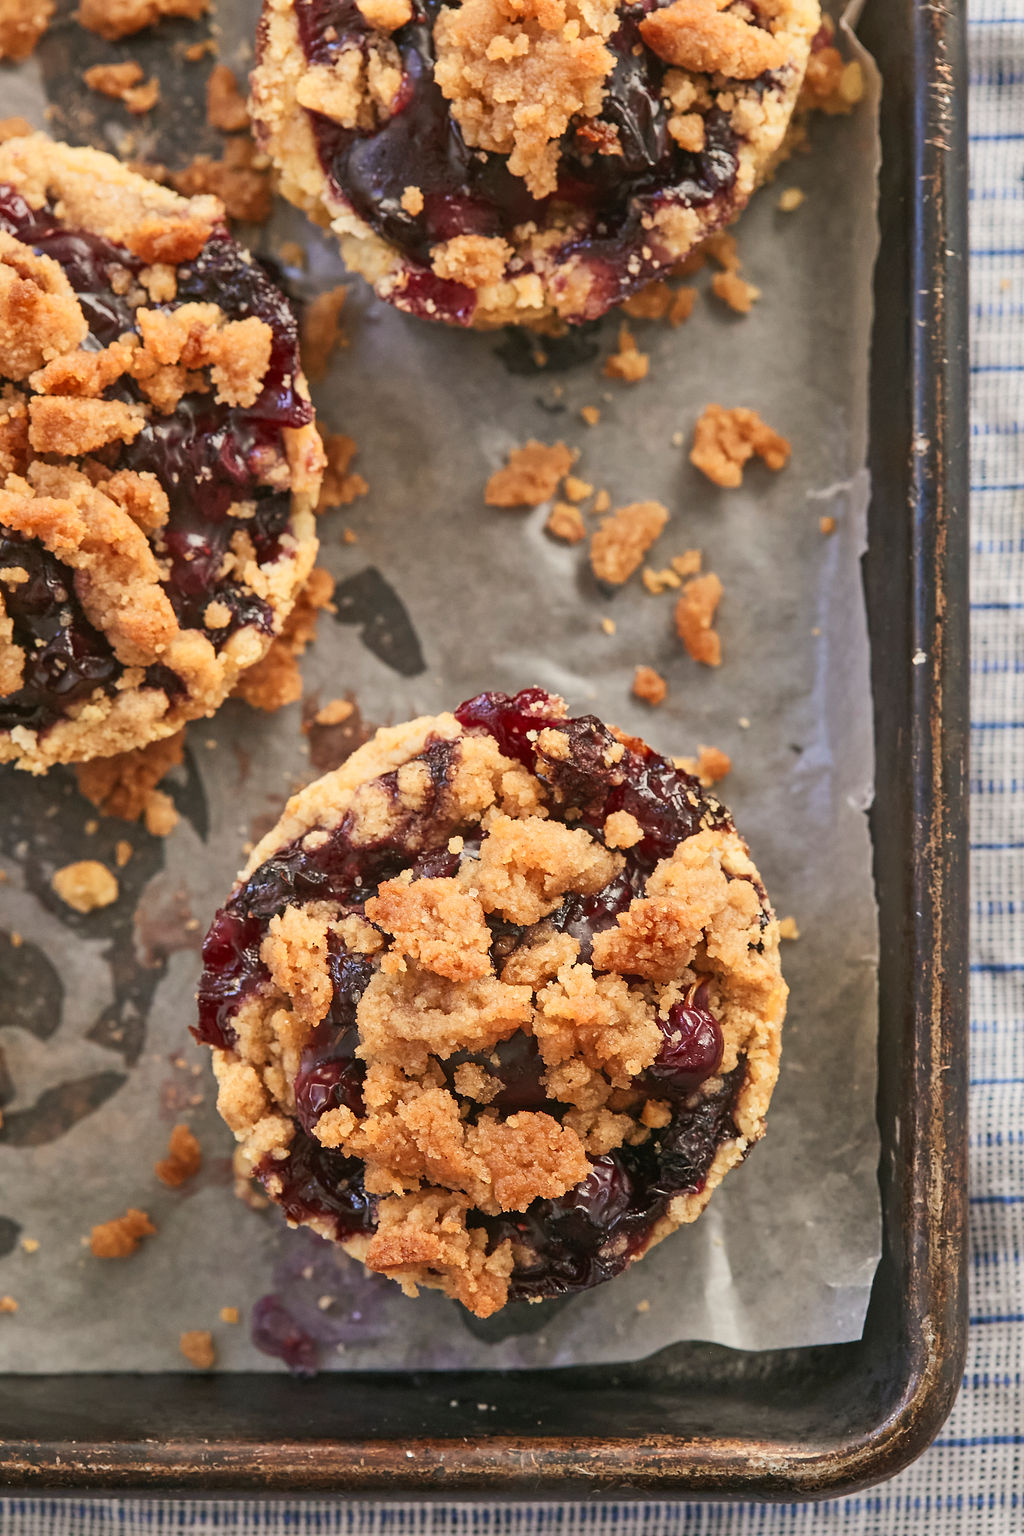 Overhead photo of Blueberry Crumb Pies highlighting the crumble topping on the juicy blueberry filling.